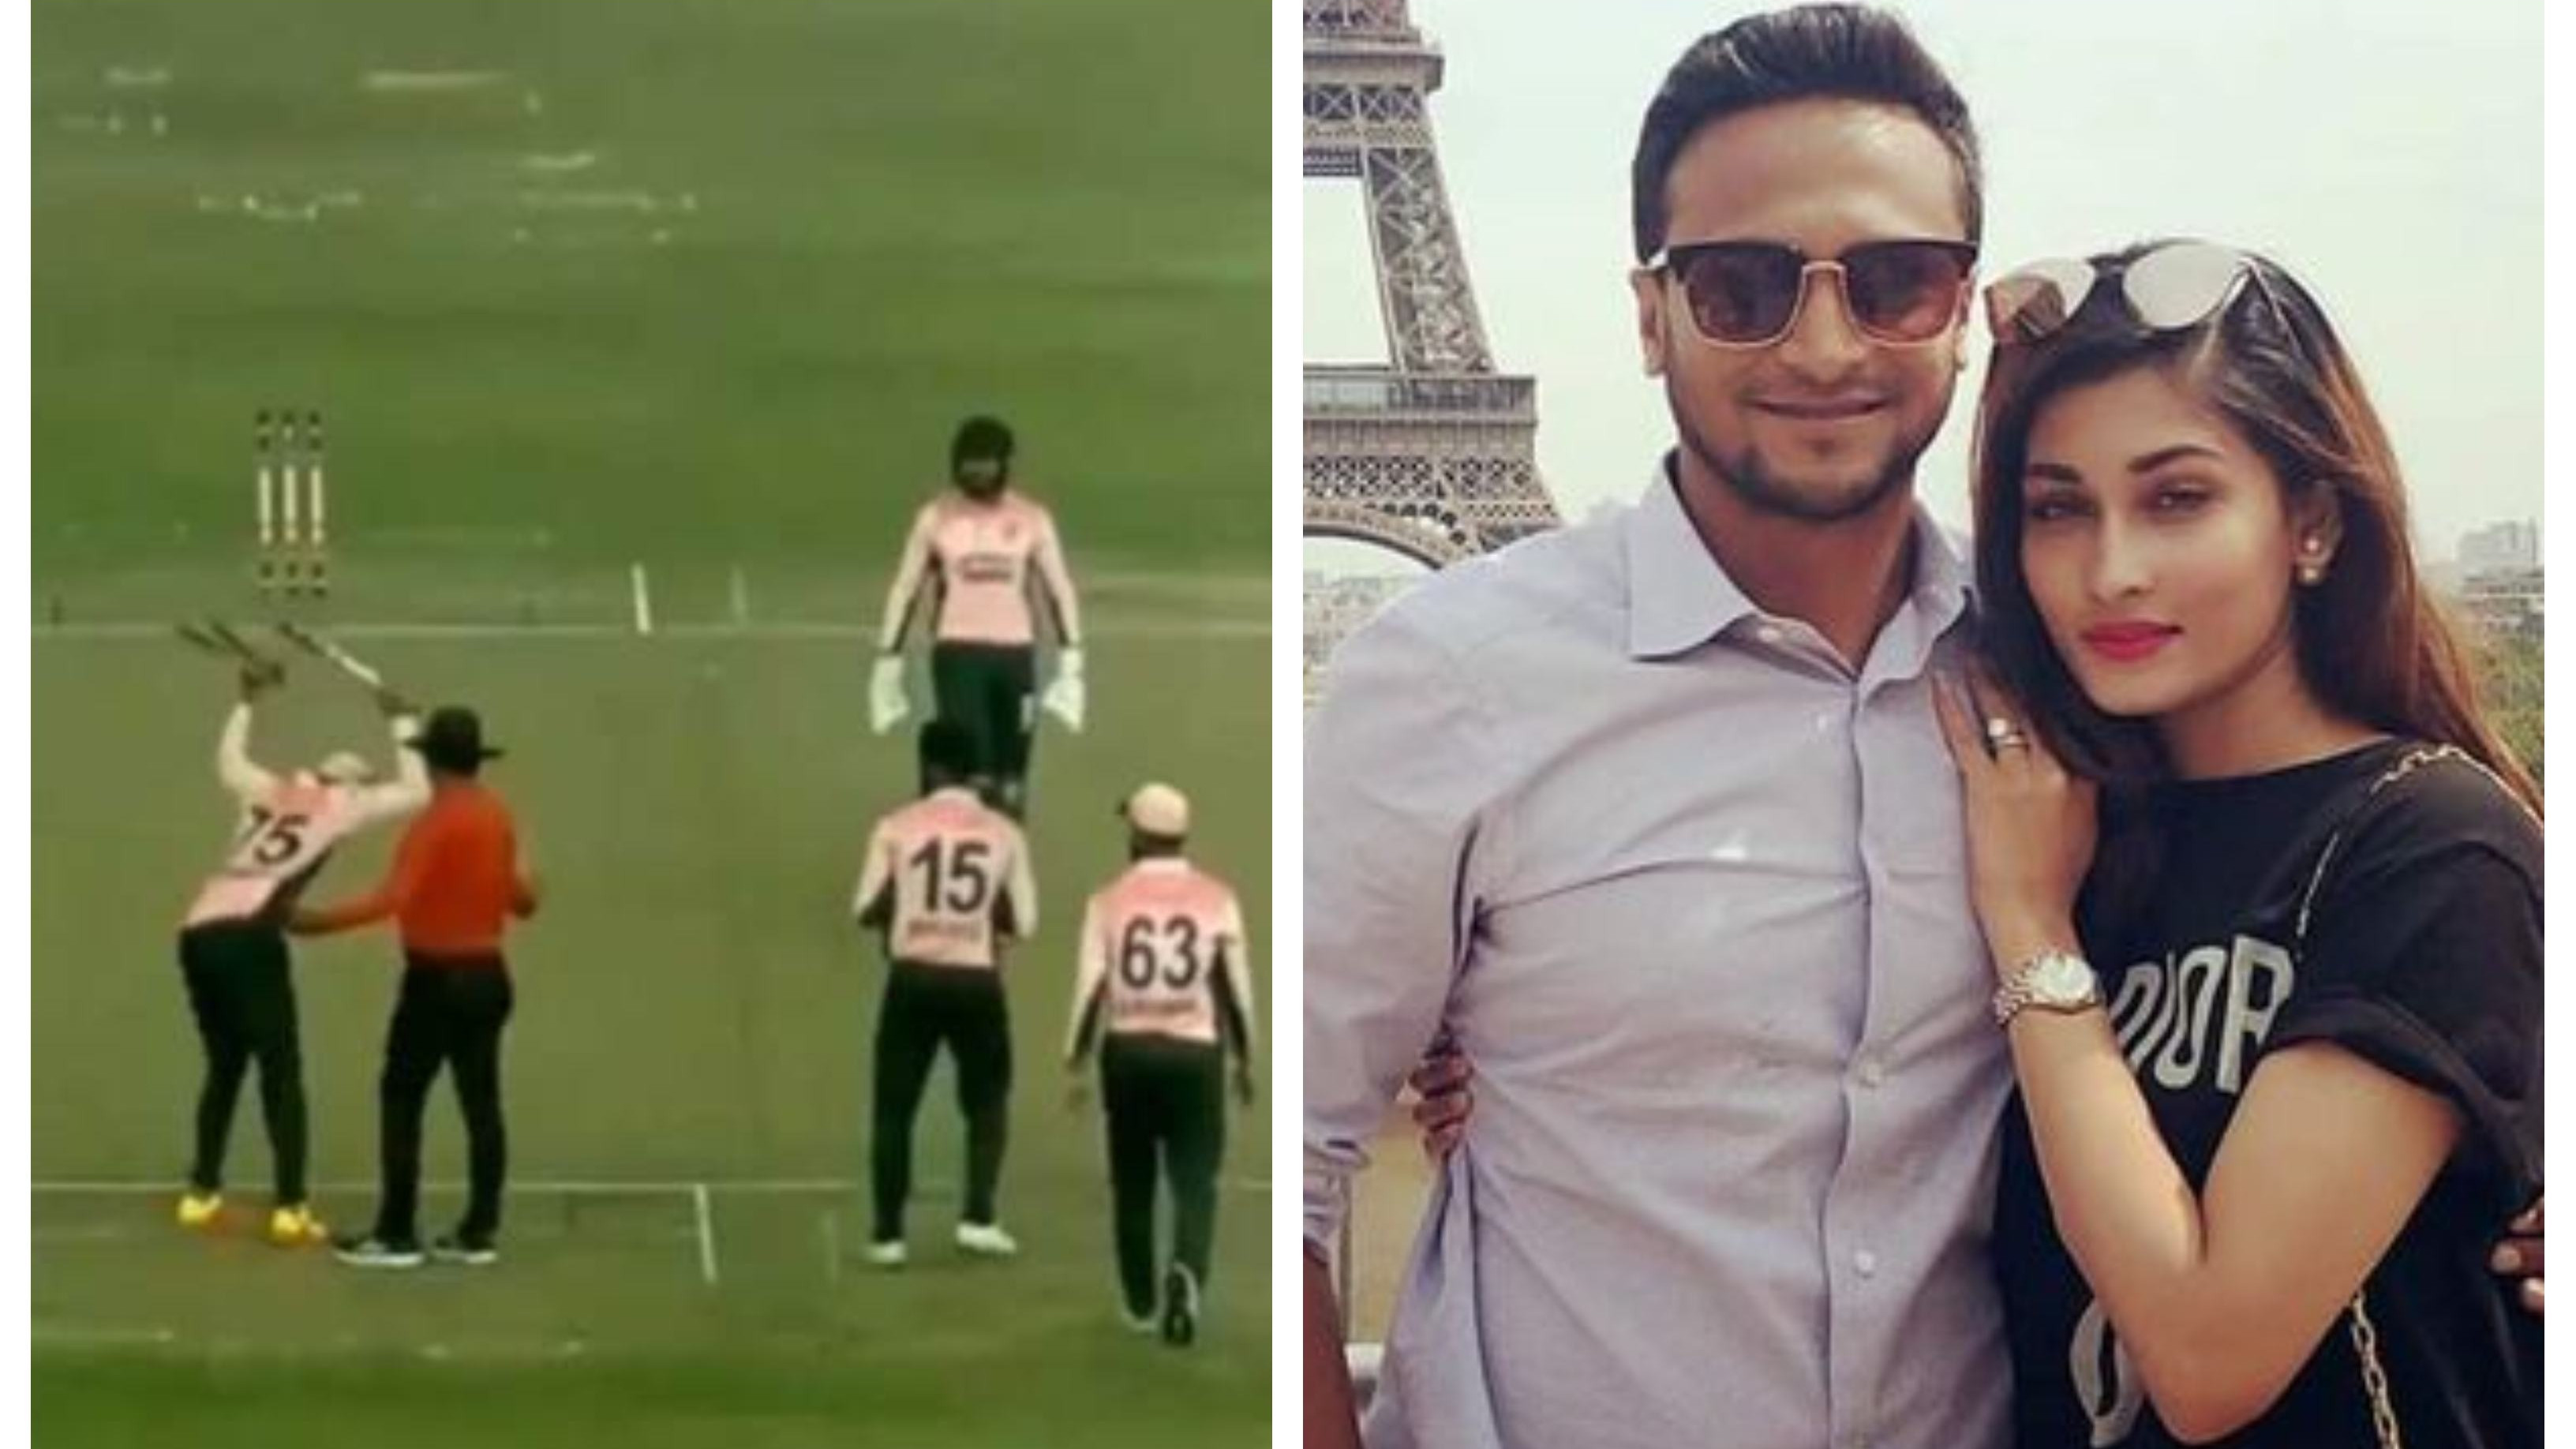 ‘Plot against him to portray him as villain’, Shakib Al Hasan's wife defends husband’s on-field action